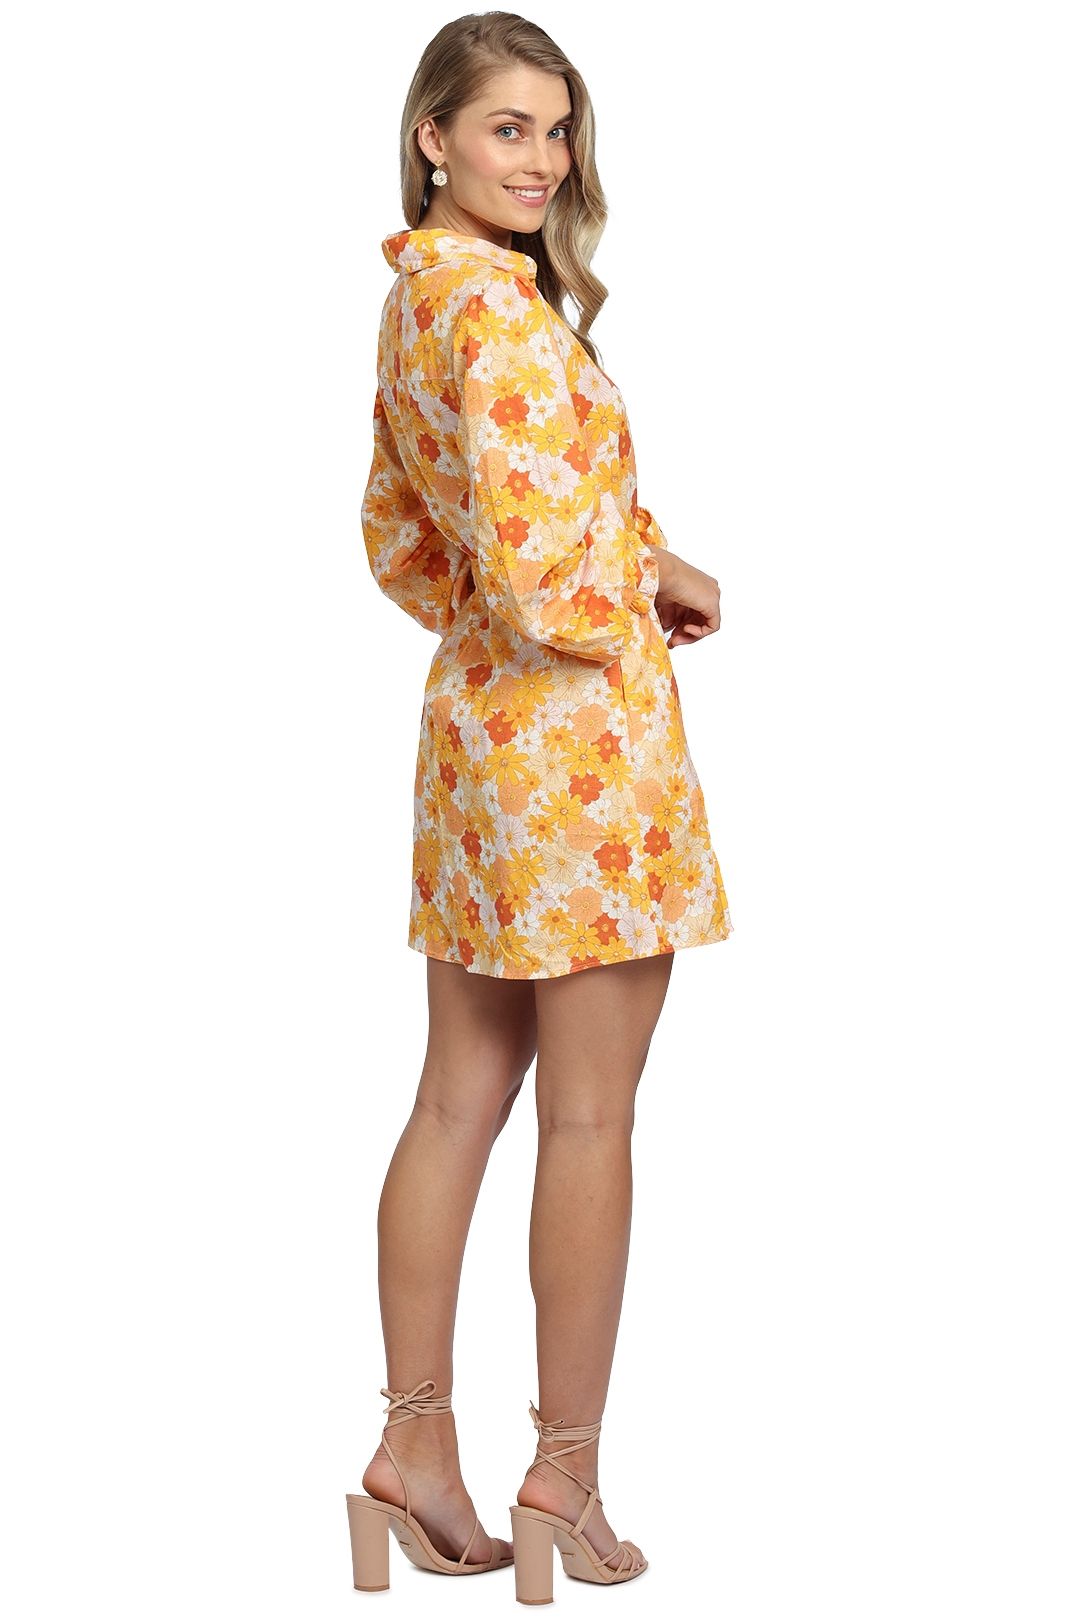 Charlie Holiday Jagger Dress Seventies Floral Mini